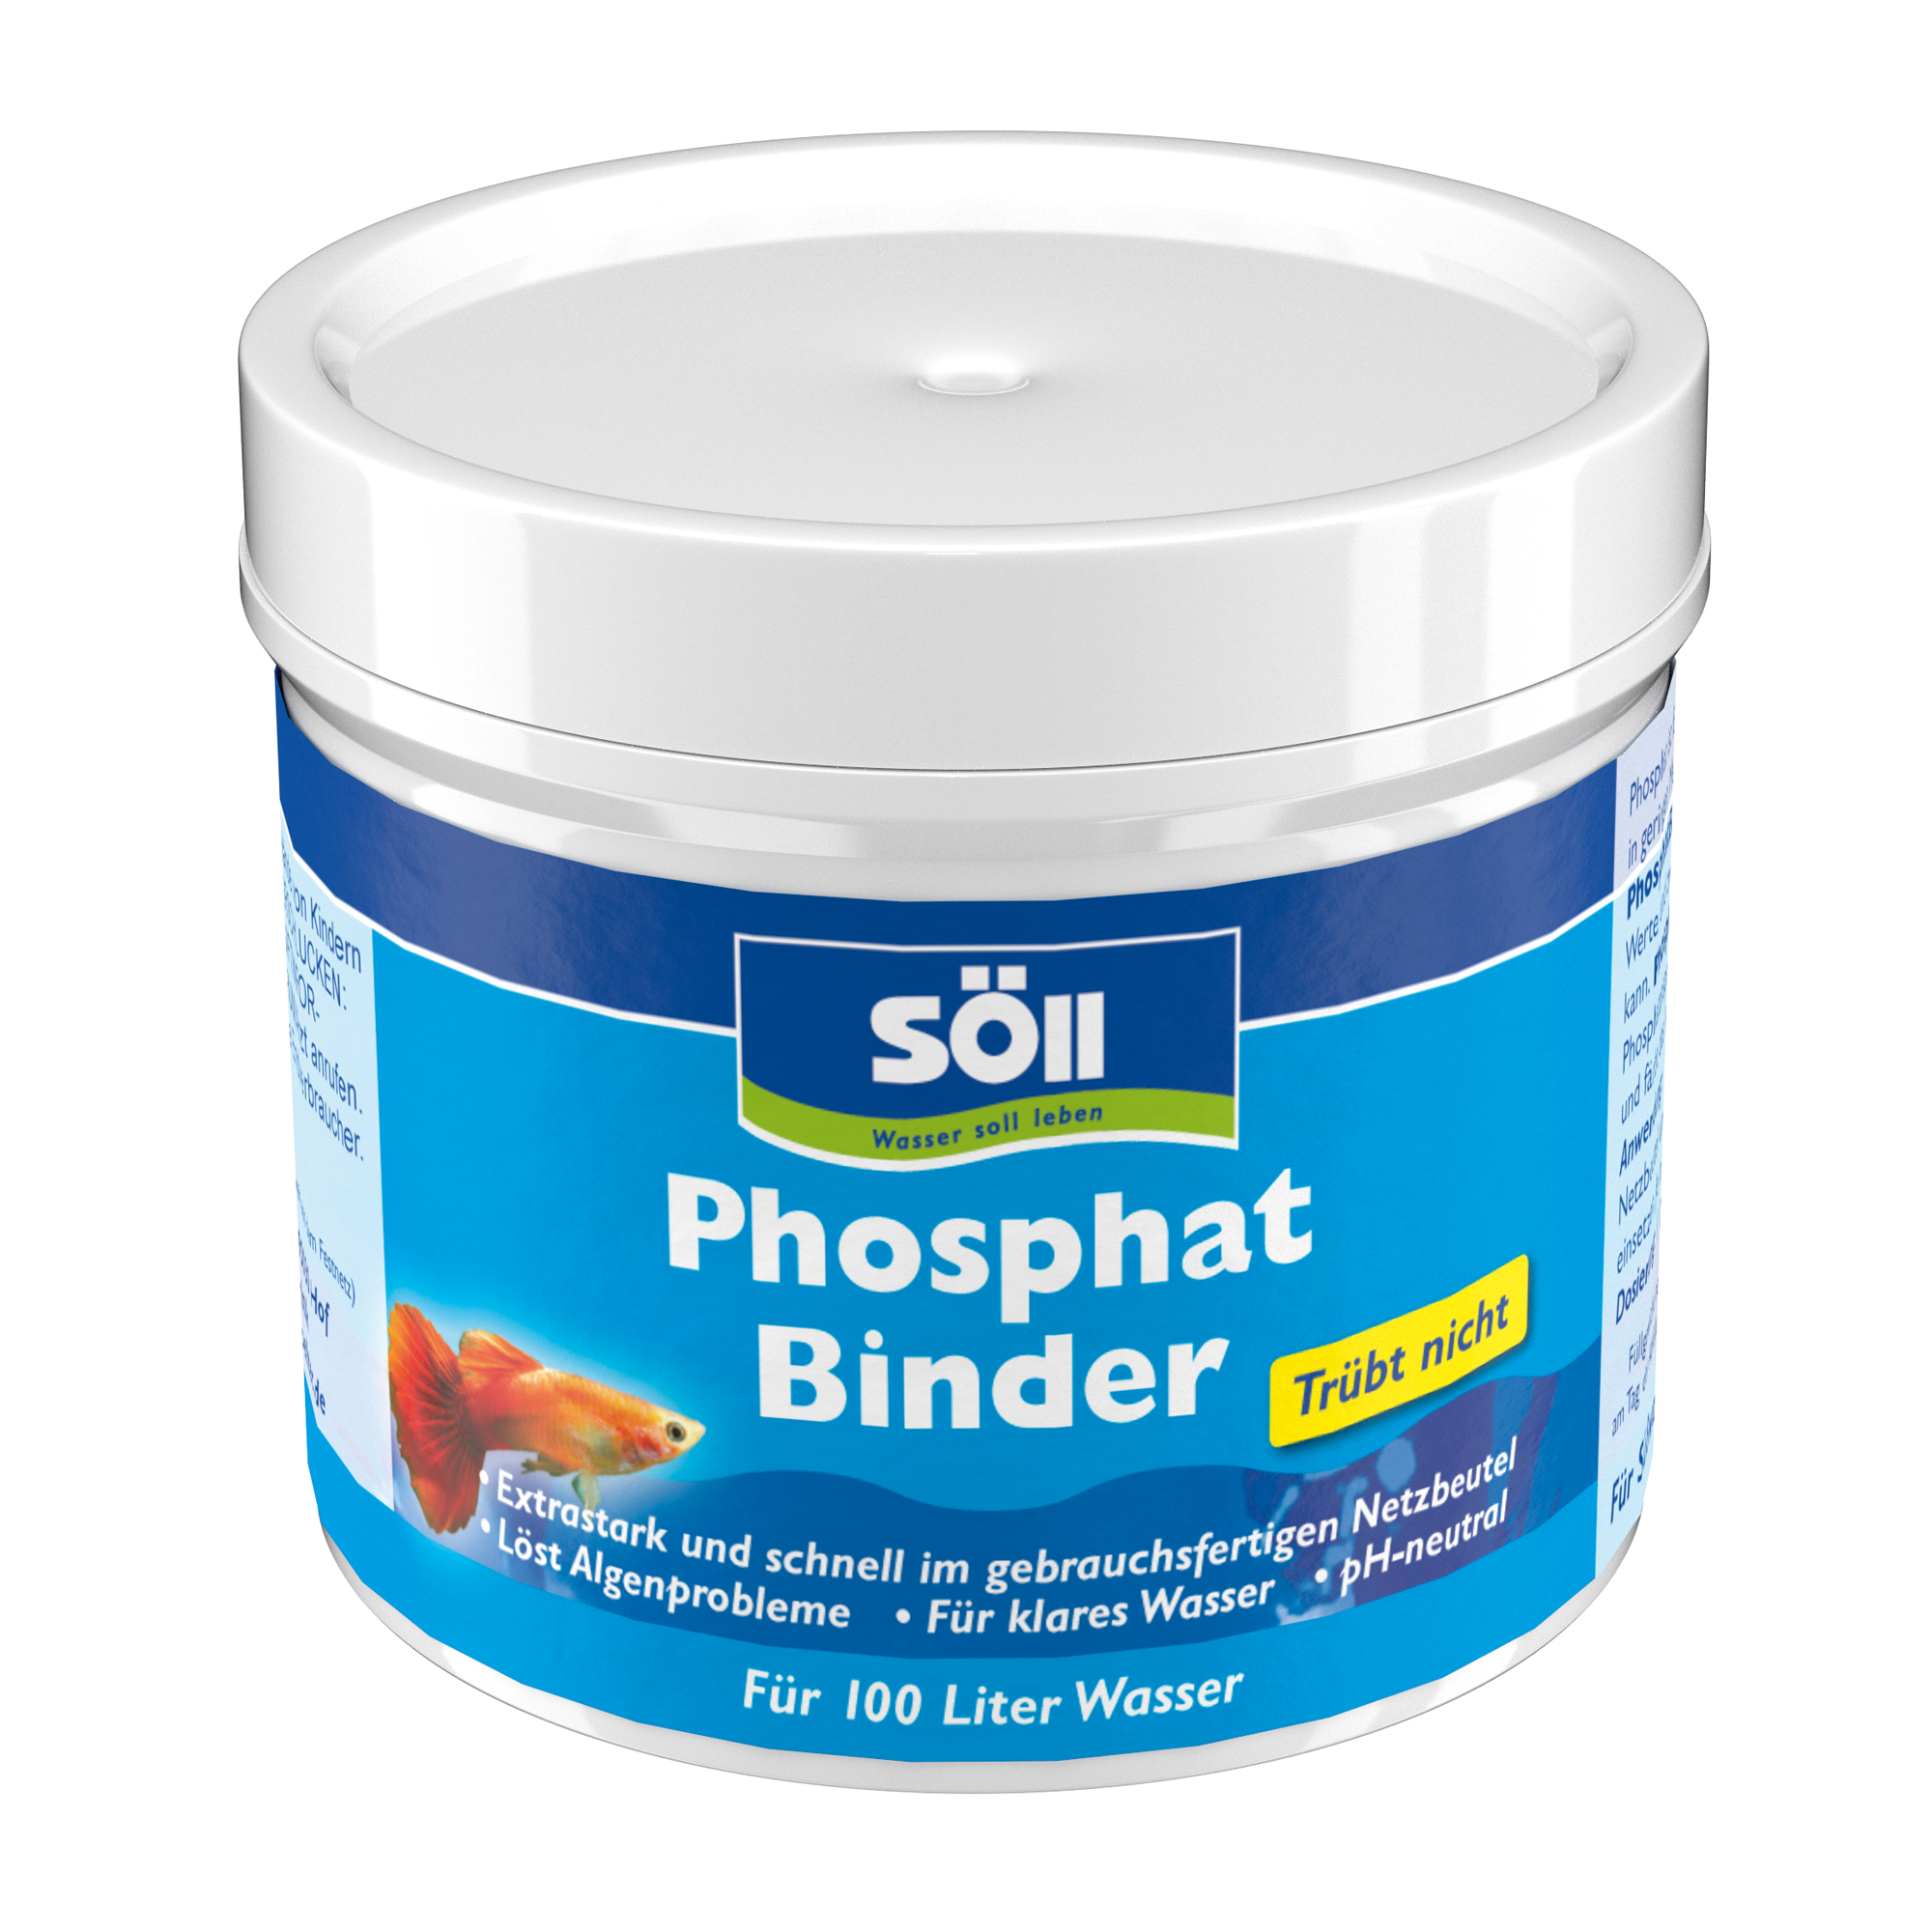 Phosphat Binder 60 g + product picture